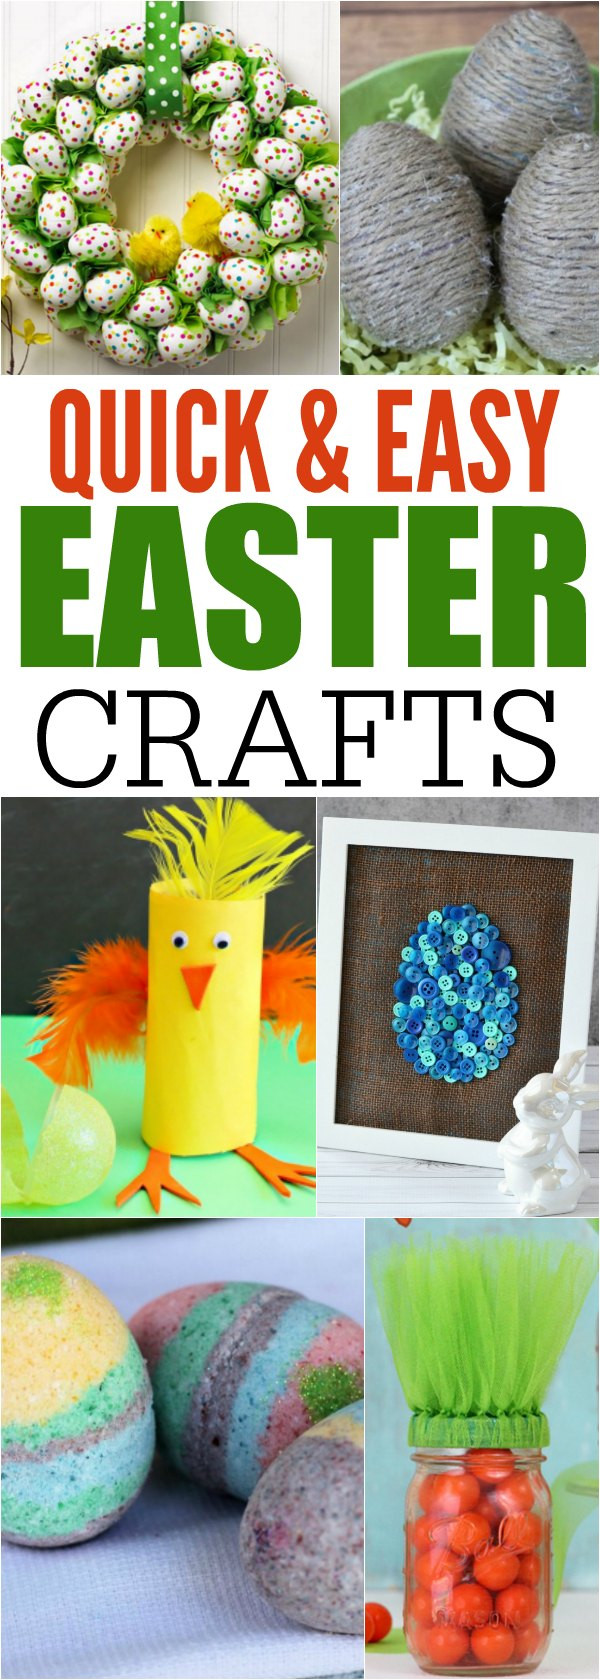 Quick Easy Crafts For Kids
 Quick and Easy Easter Crafts to make today Coupon Closet